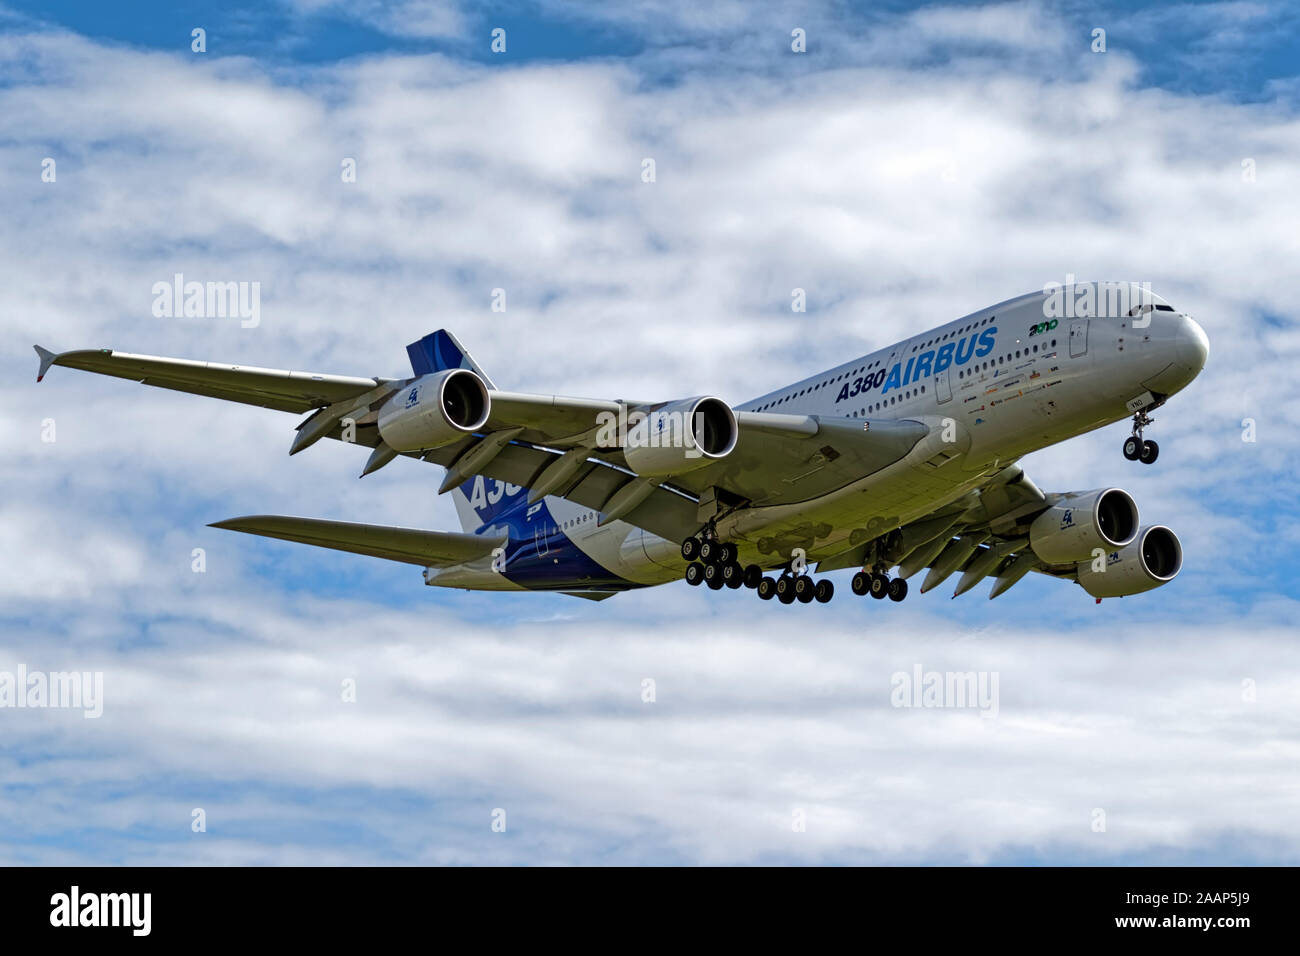 Kemble, Gloucestershire, UK - September 18, 2010: An Airbus Industrie A380 prototype, F-WWDD Stock Photo